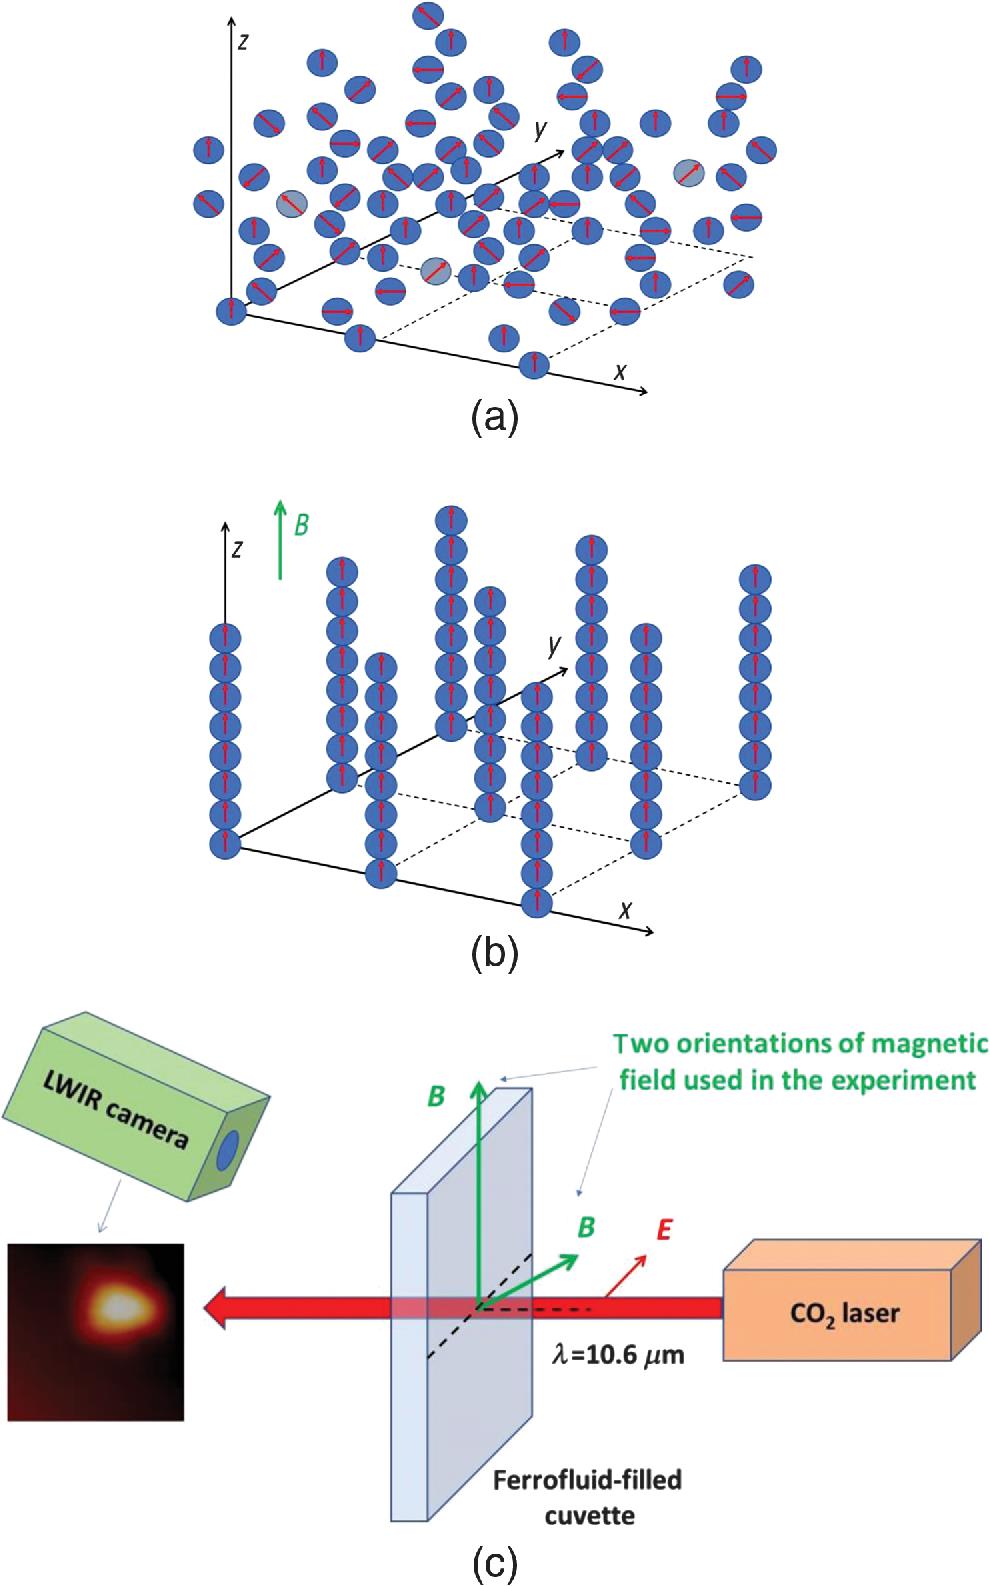 (a), (b) Schematics of the metamaterial system. (a) In the absence of an external magnetic field, cobalt nanoparticles are randomly distributed within the ferrofluid, and their magnetic moments (shown by red arrows) have no preferred spatial orientation; (b) application of an external magnetic field leads to formation of nanocolumns (made of nanoparticles), which are aligned along the field direction. (c) Schematic diagram of the experimental geometry. A long wavelength infrared (LWIR) camera (FLIR Systems, USA) is used to study CO2 laser beam propagation through the ferrofluid subjected to the external DC magnetic field. The inset shows the measured beam shape in the absence of the ferrofluid sample. Two orientations of the external magnetic field B used in our experiments are shown by green arrows. The red arrow shows laser light polarization. Note that the z axis is assumed to always point in the direction of the external DC magnetic field.